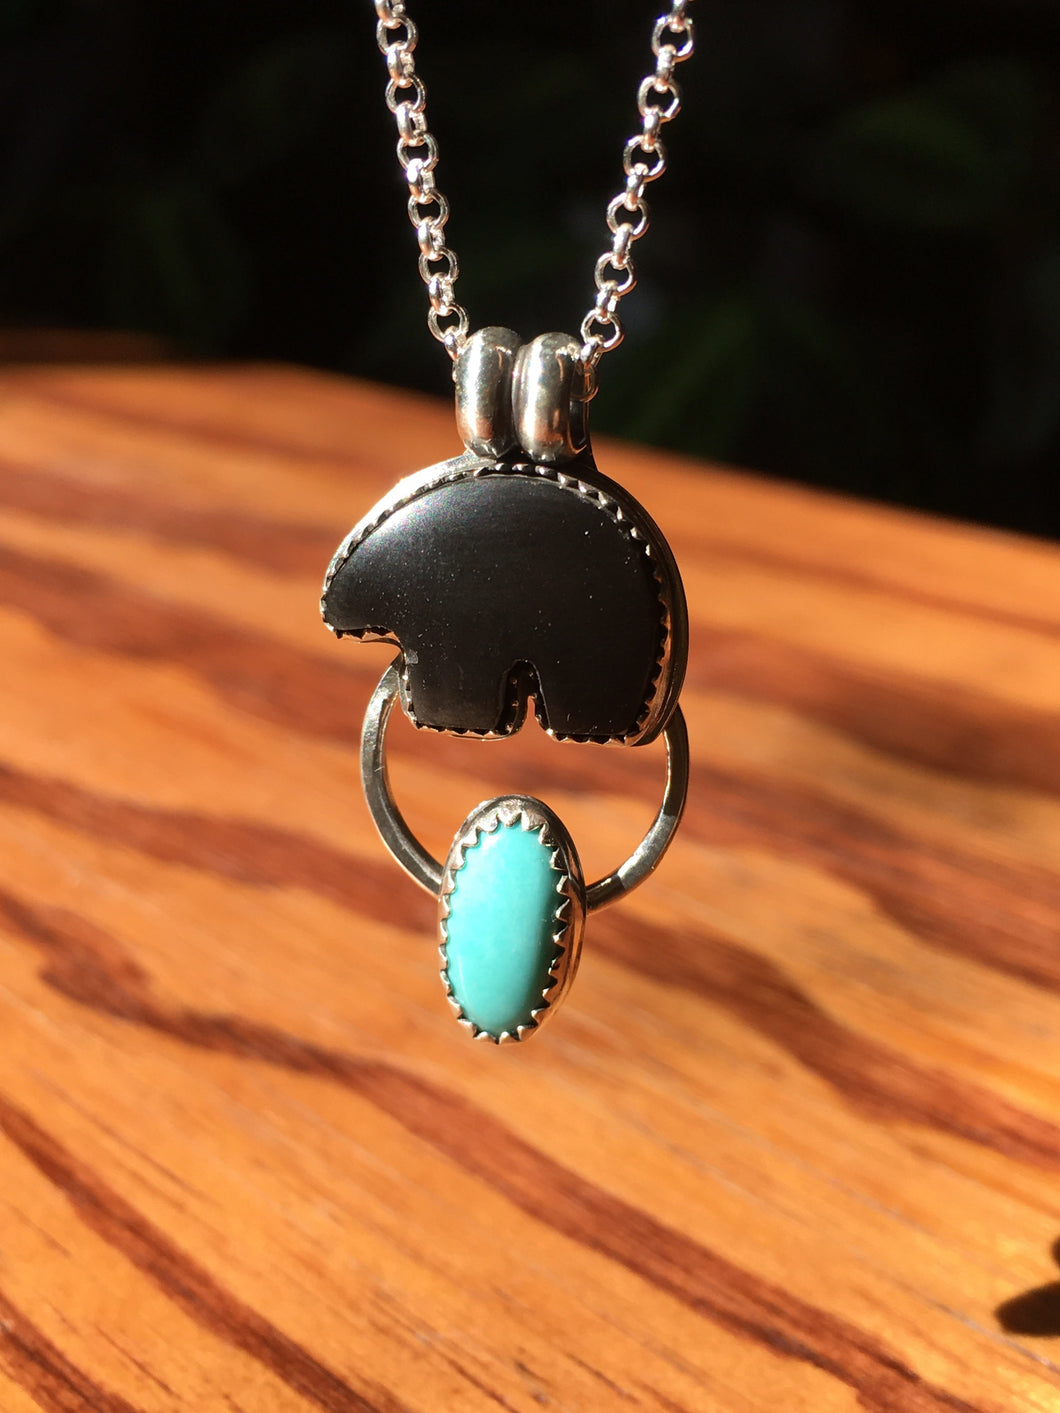 Osito Necklace #3 - Black onyx with Campitos turquoise